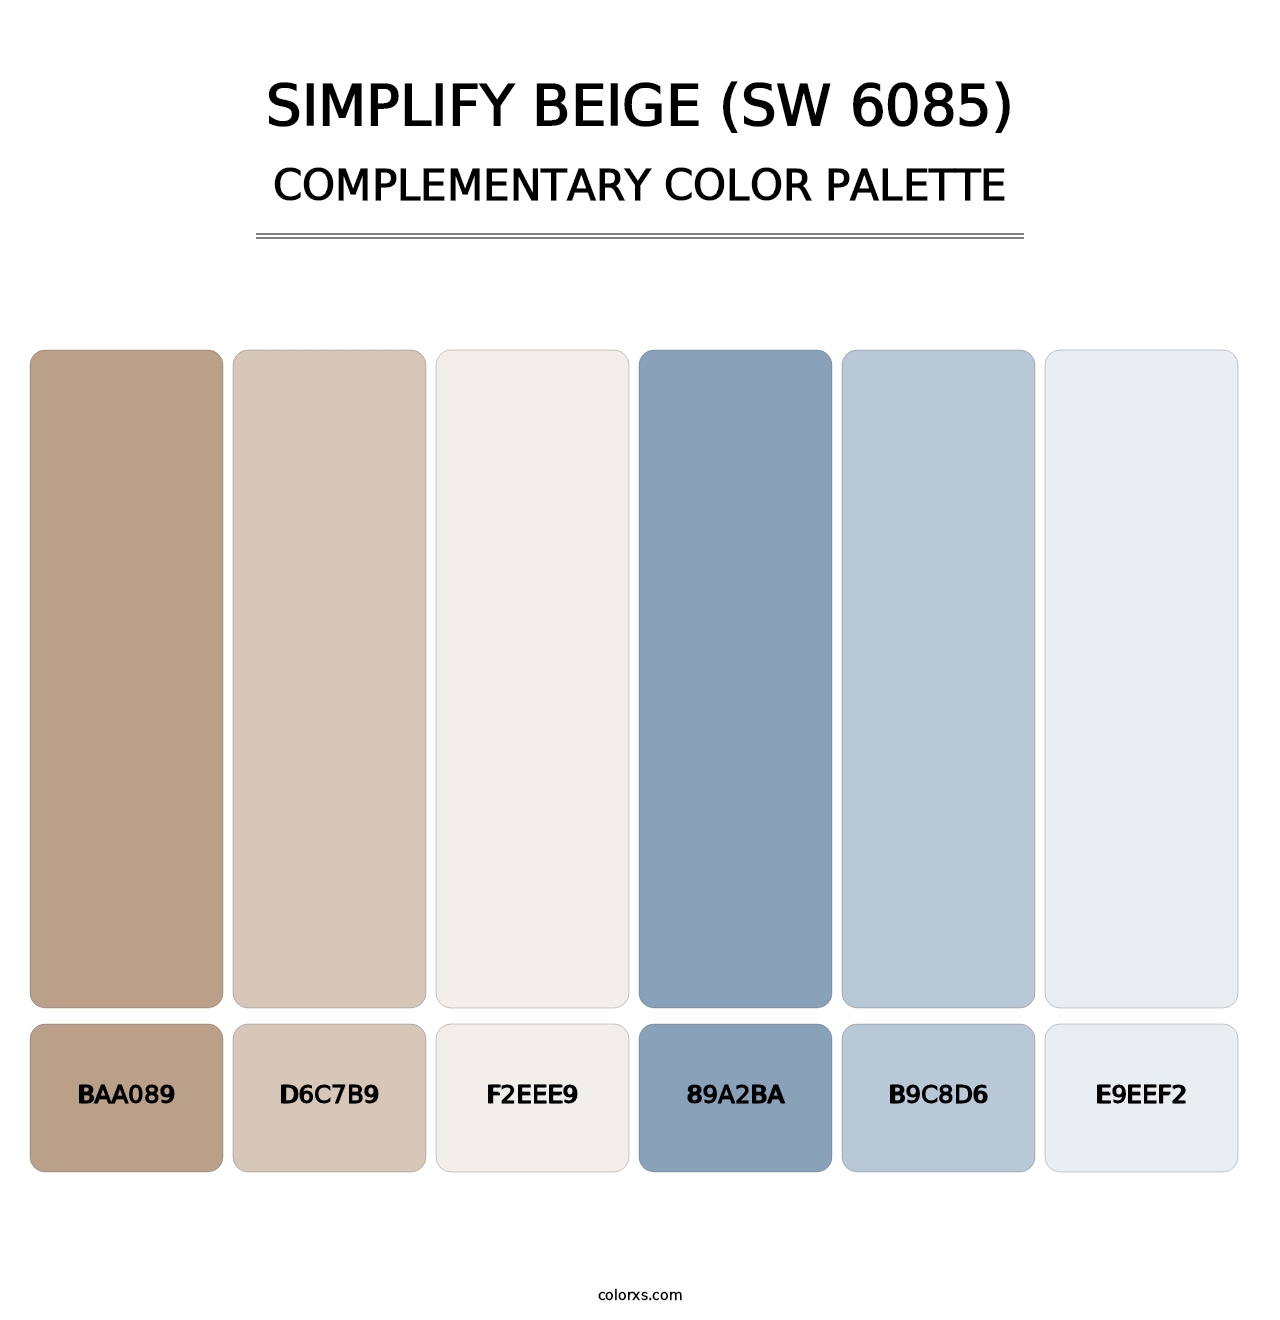 Simplify Beige (SW 6085) - Complementary Color Palette